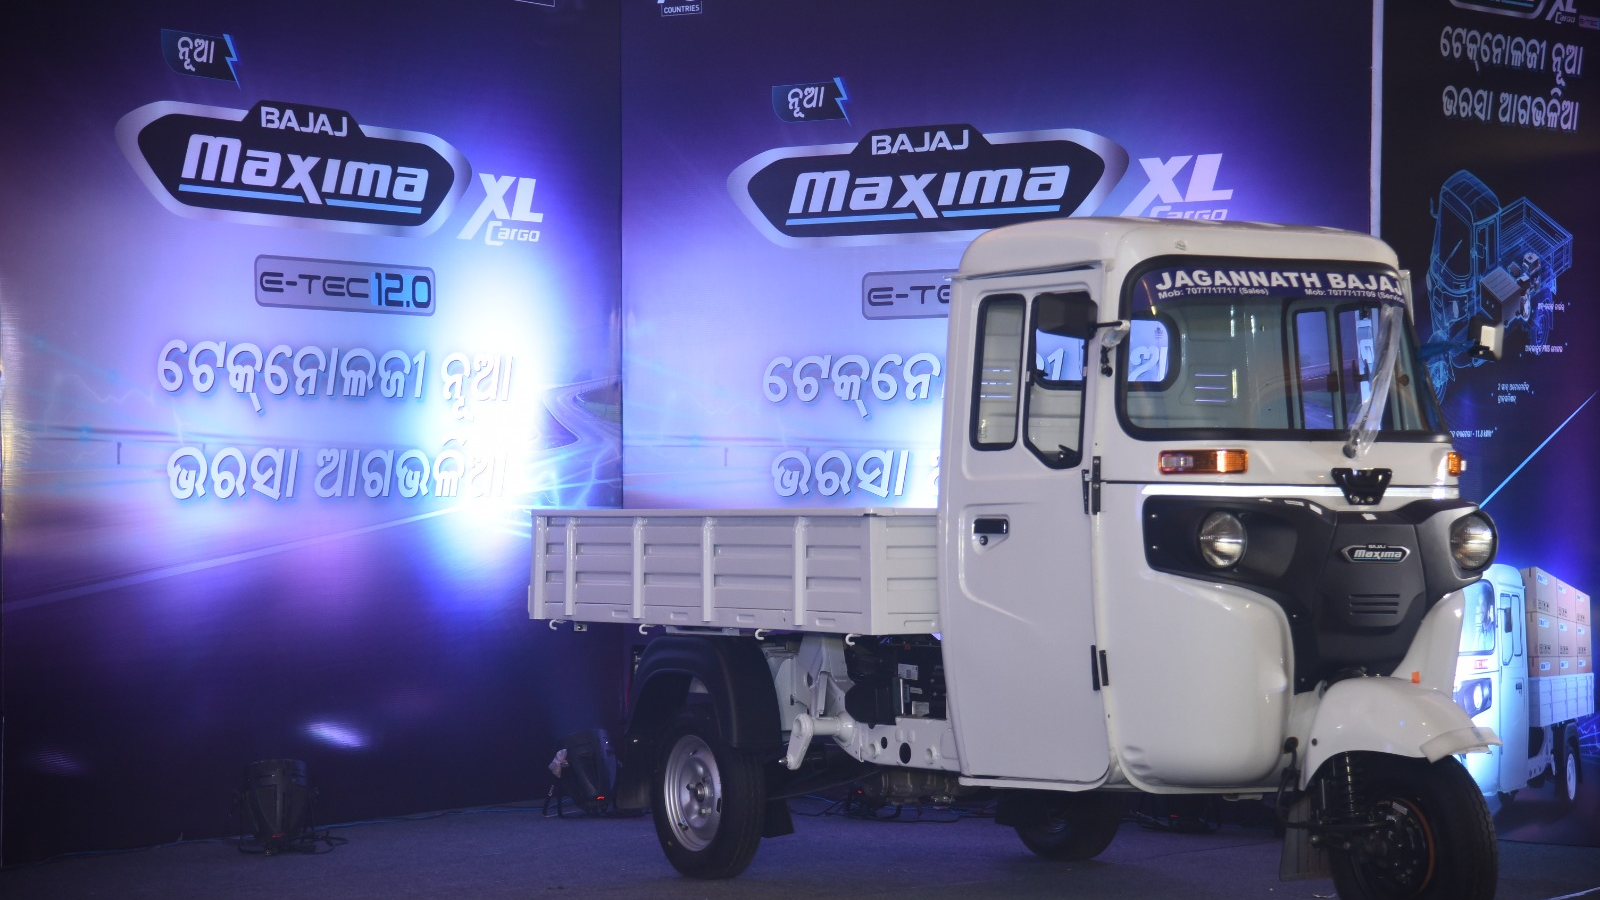 The cargo electric three-wheelers XL CargoE-Tec 12.0 with an 11.8 kWh battery, gives a range of 183 km (as per ARAI certification) and is priced at Rs. 3,97,833/- (ex-showroom Bhubaneswar/ Cuttack, post FAME II incentive)